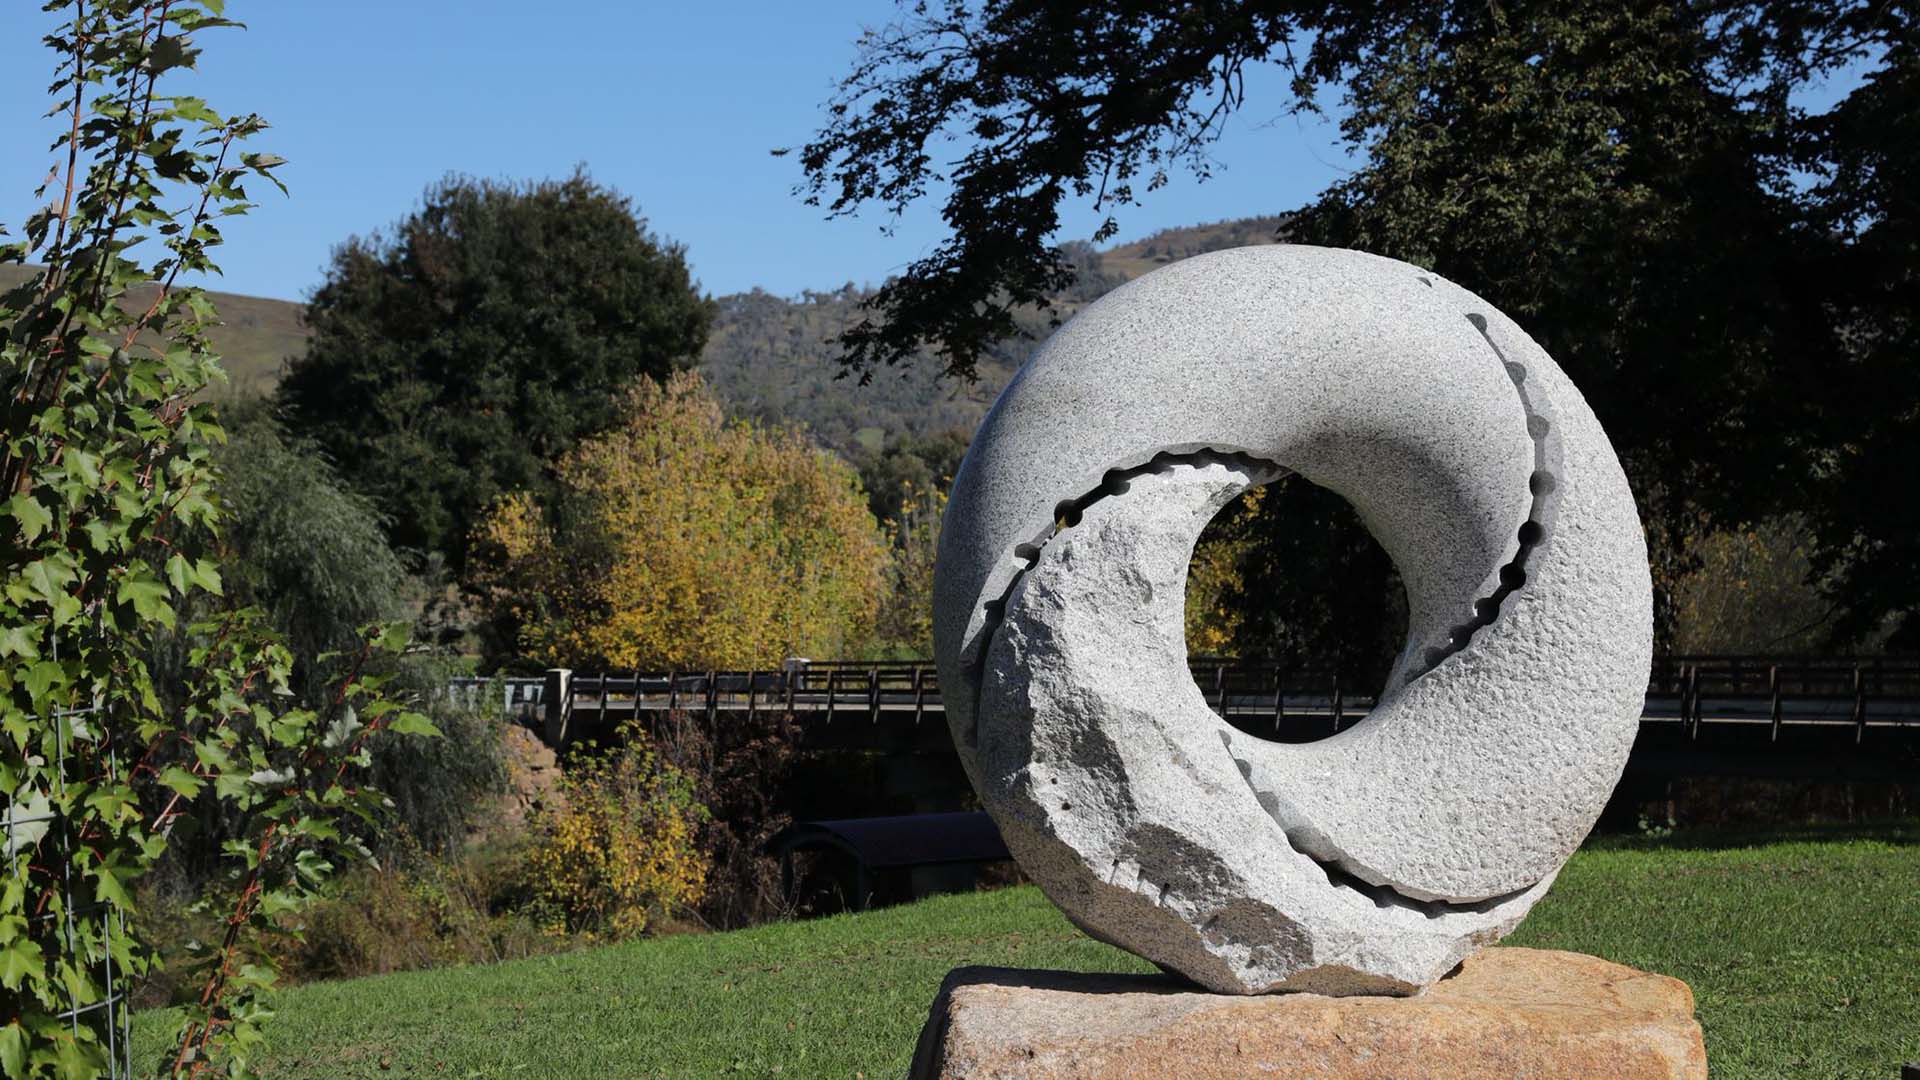 Regional New South Wales Just Scored a Permanent (and Super-Scenic) New Outdoor Sculpture Trail